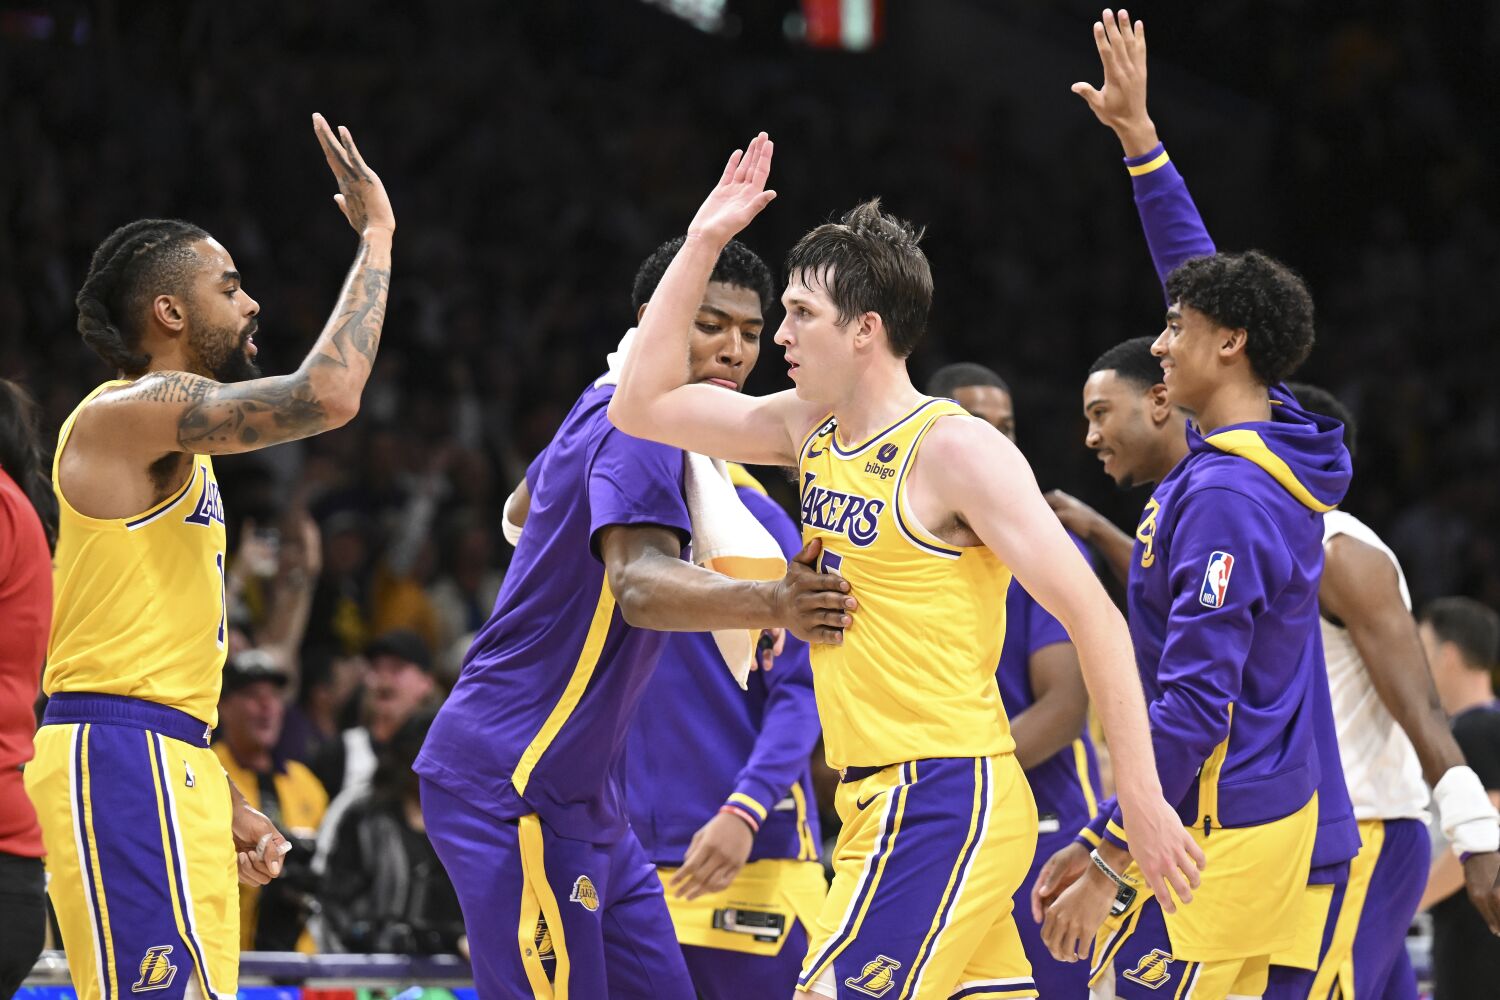 Plaschke: Clincher clinches it: These Lakers can win an NBA championship